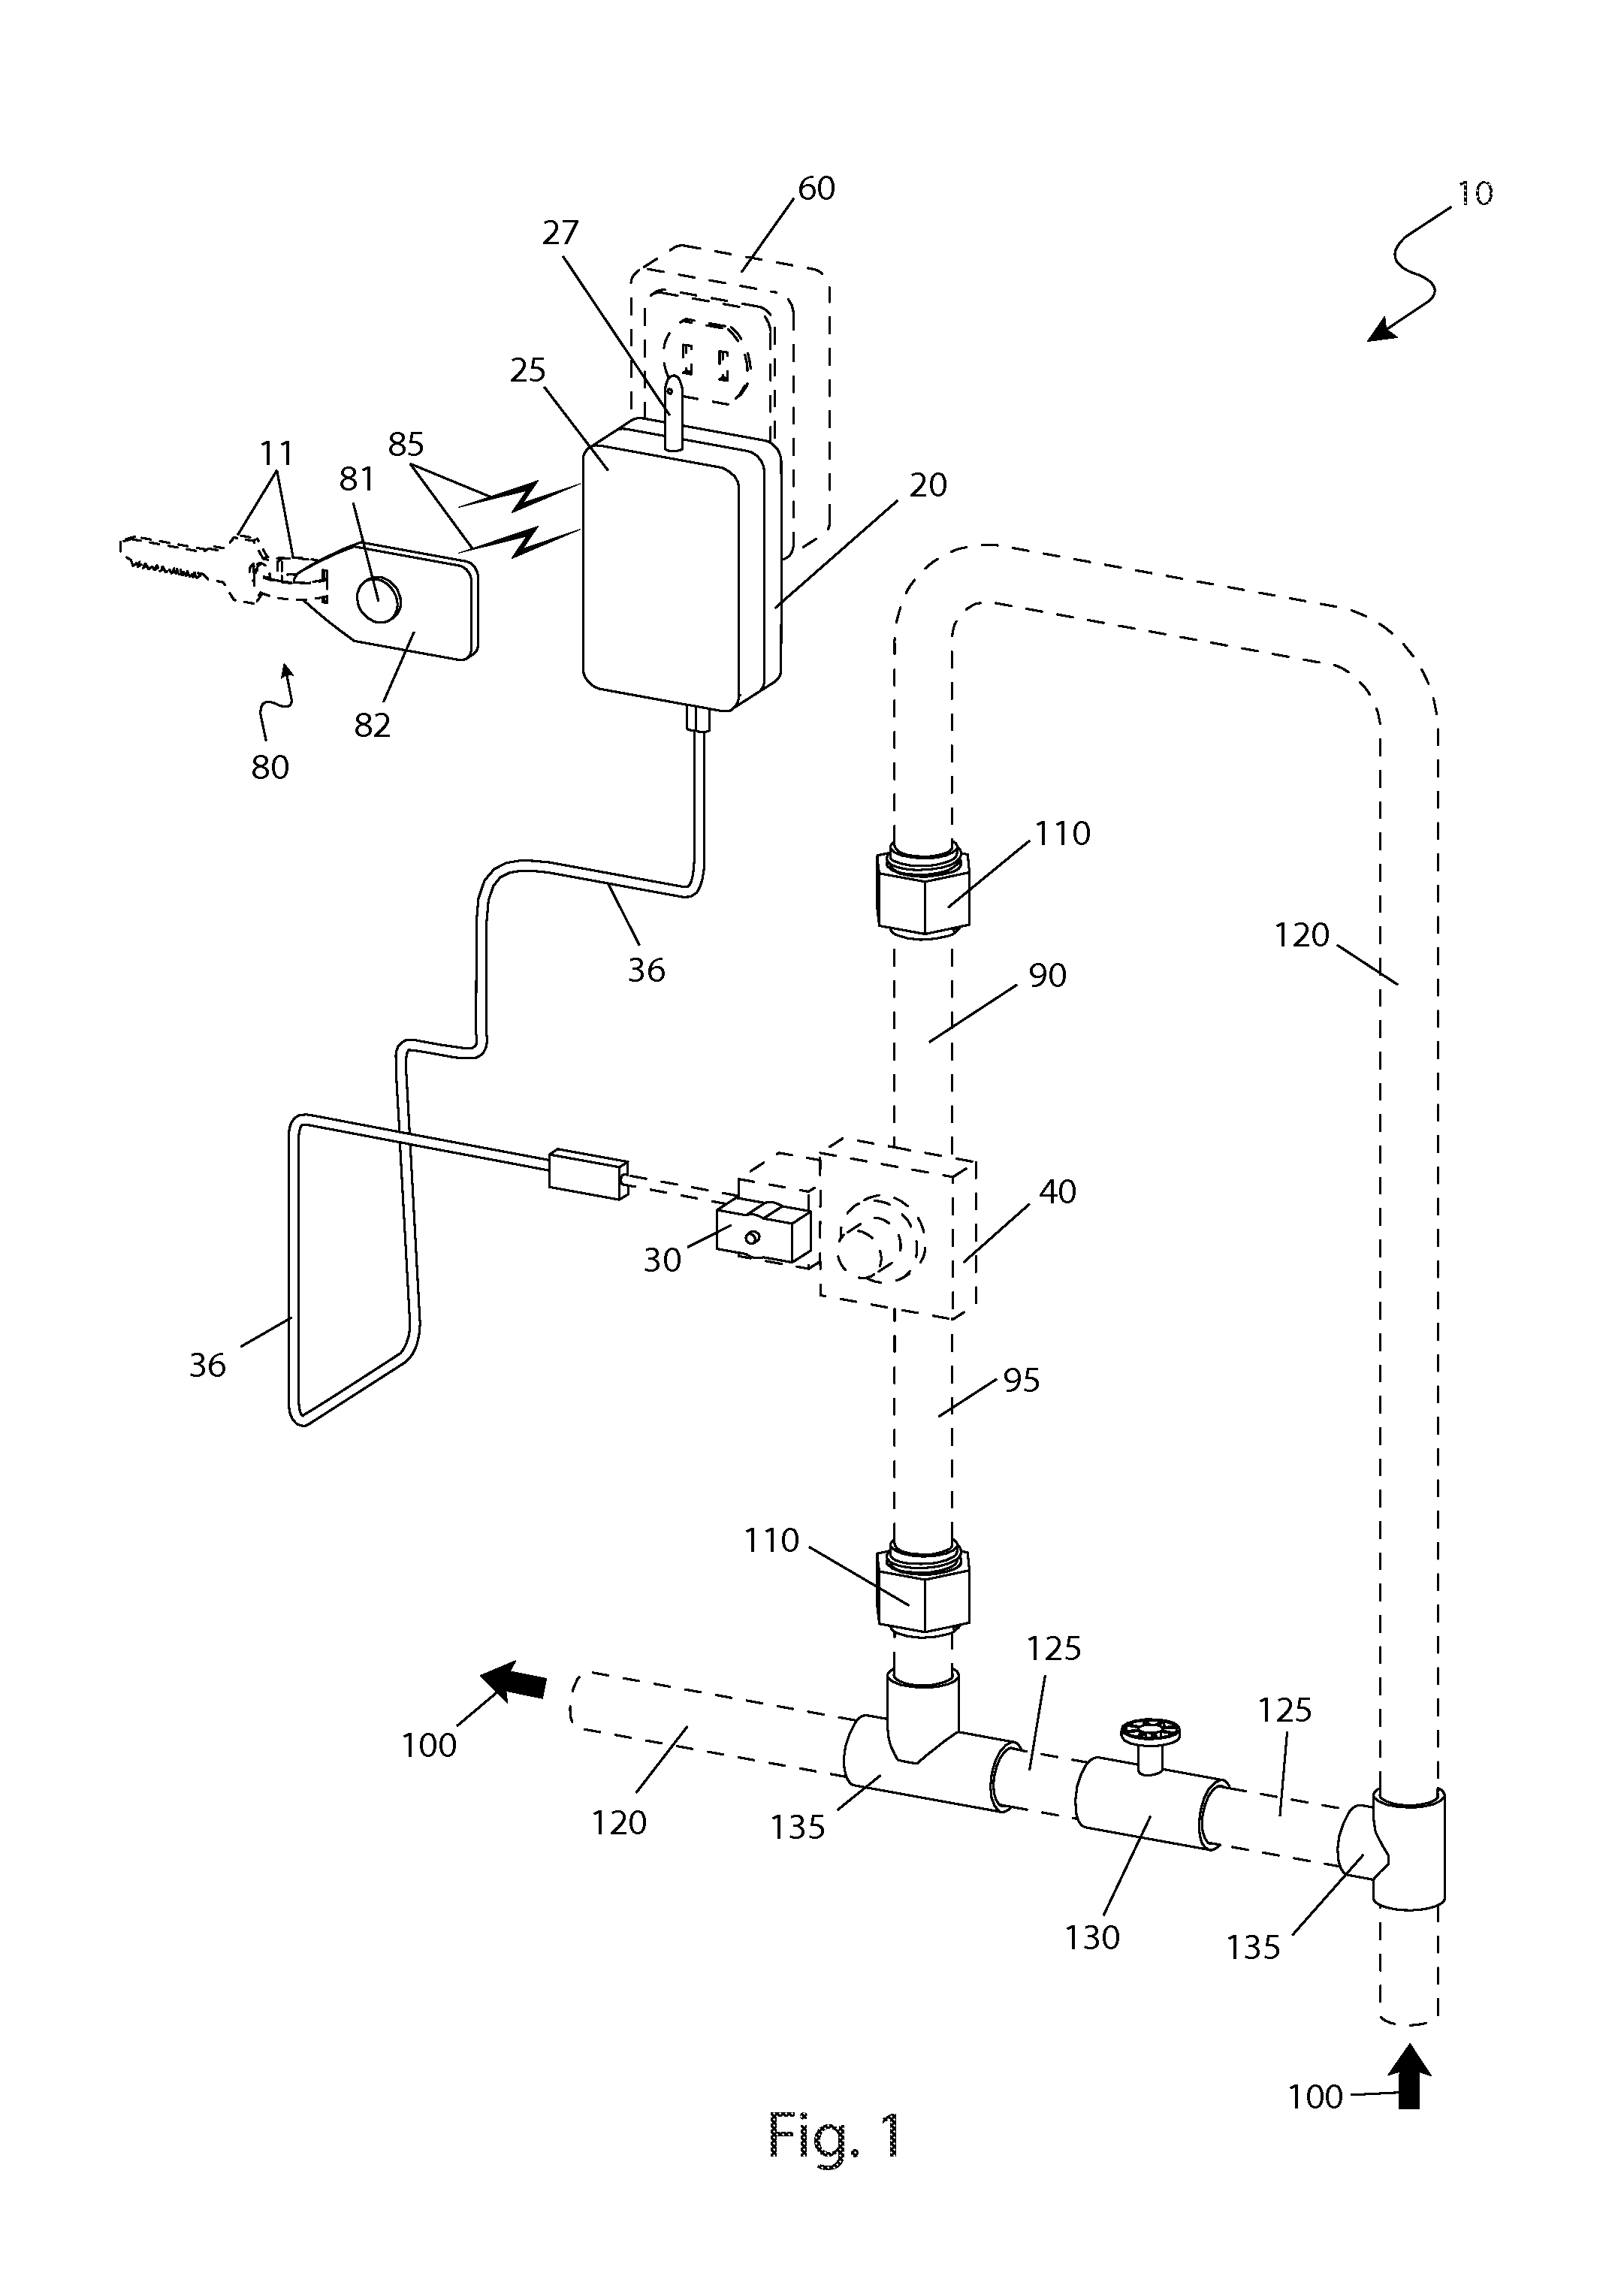 In-line utility shut-off system and method of use thereof